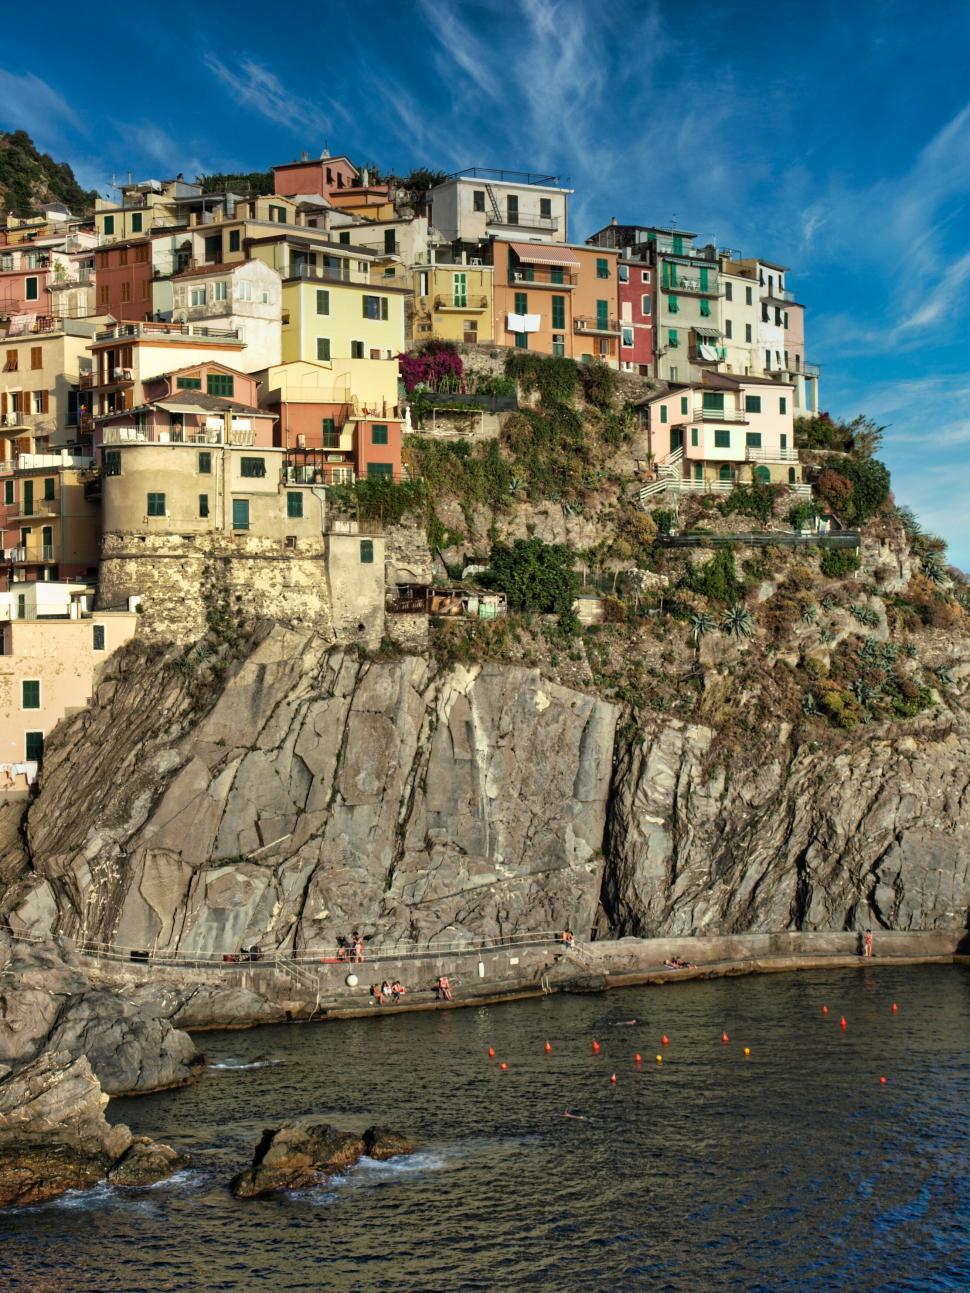 Free Image of Colorful houses clinging to an Italian cliff 